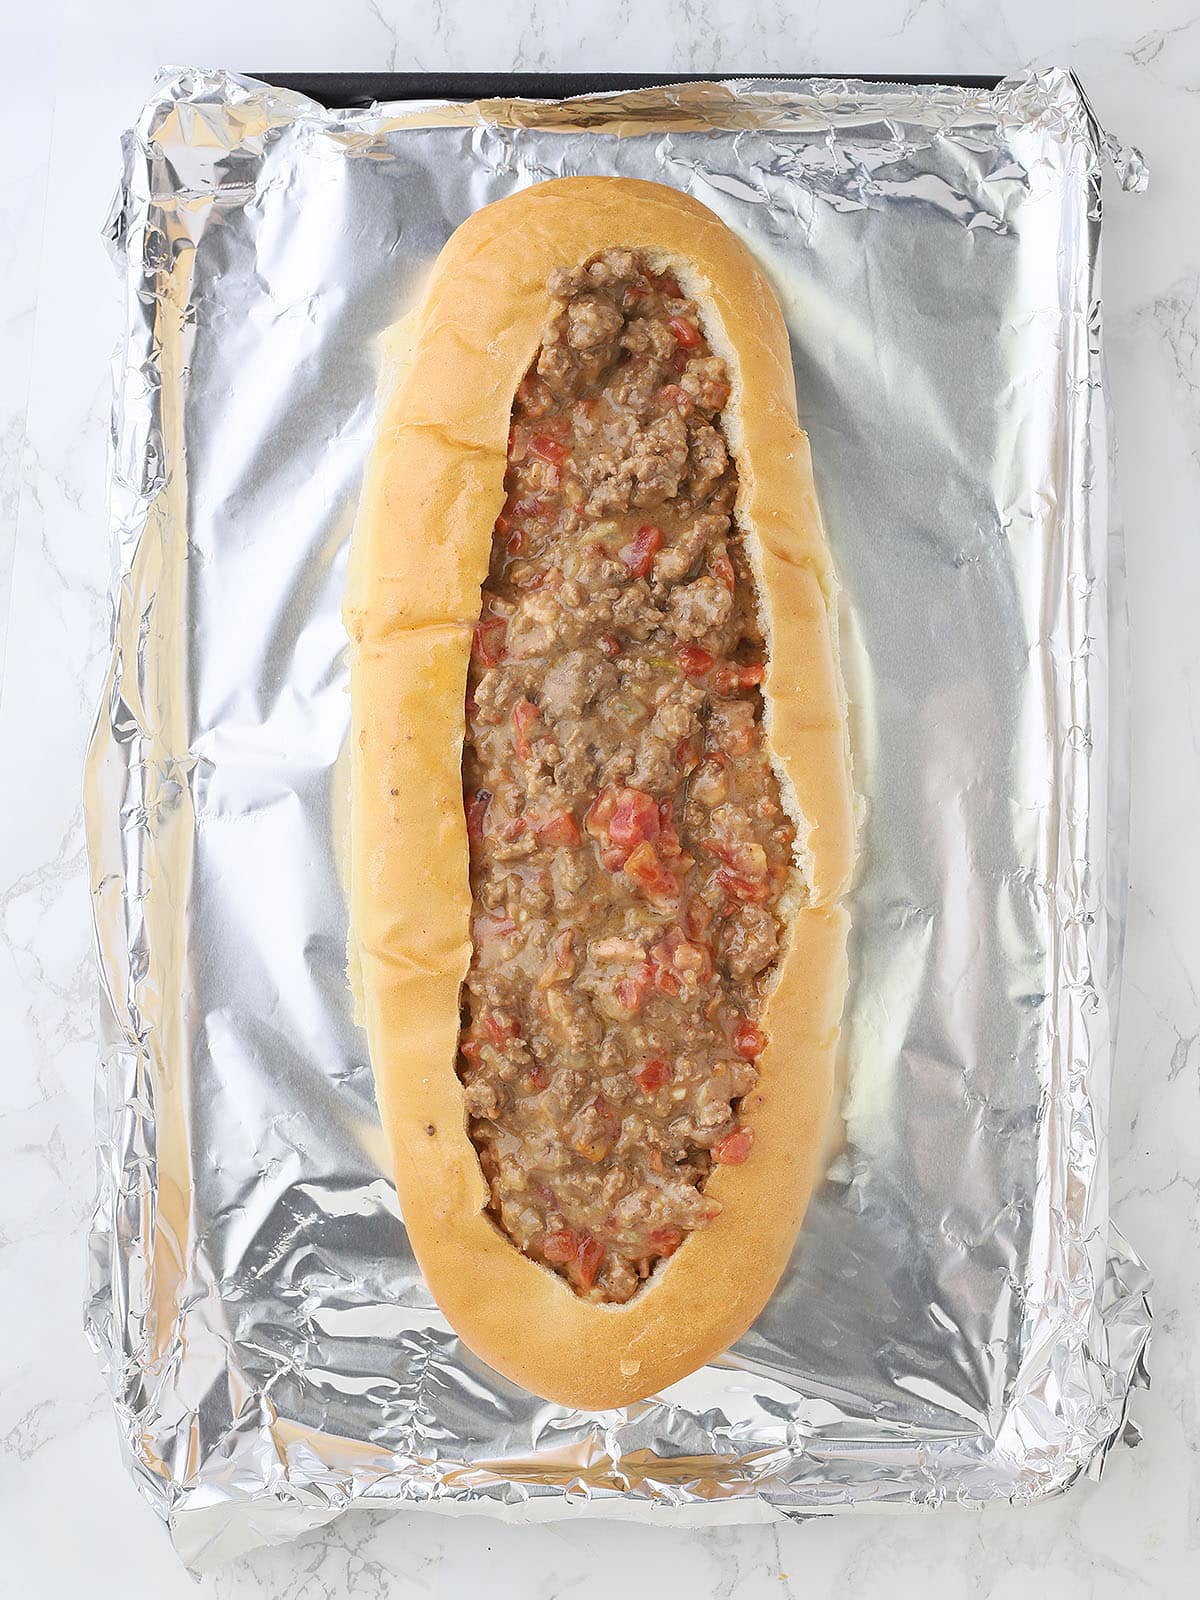 hollowed out French bread loaf filled with the cheeseburger mixture